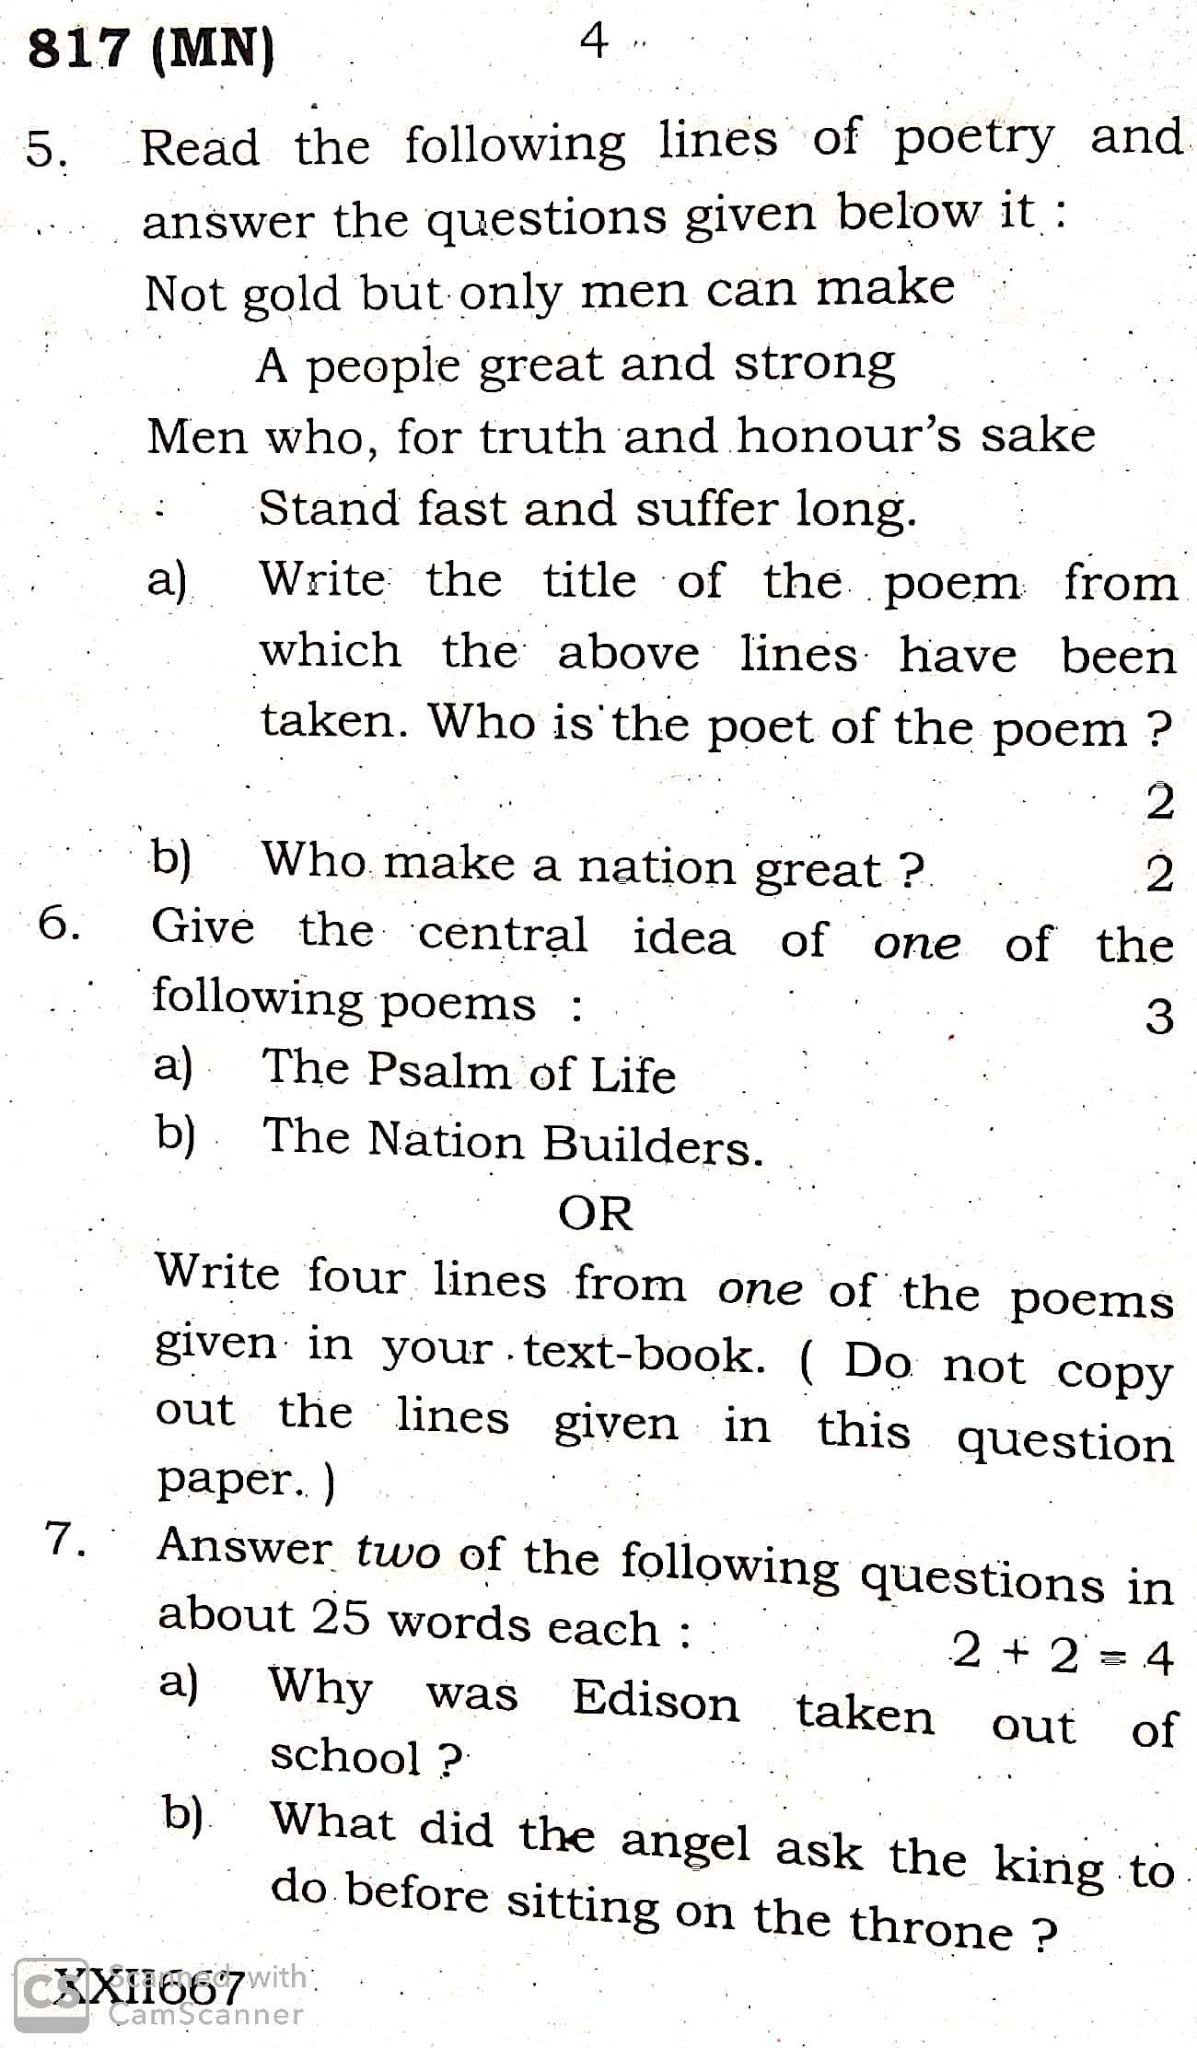 English, UP Board Question paper for 10th (High school), 2020